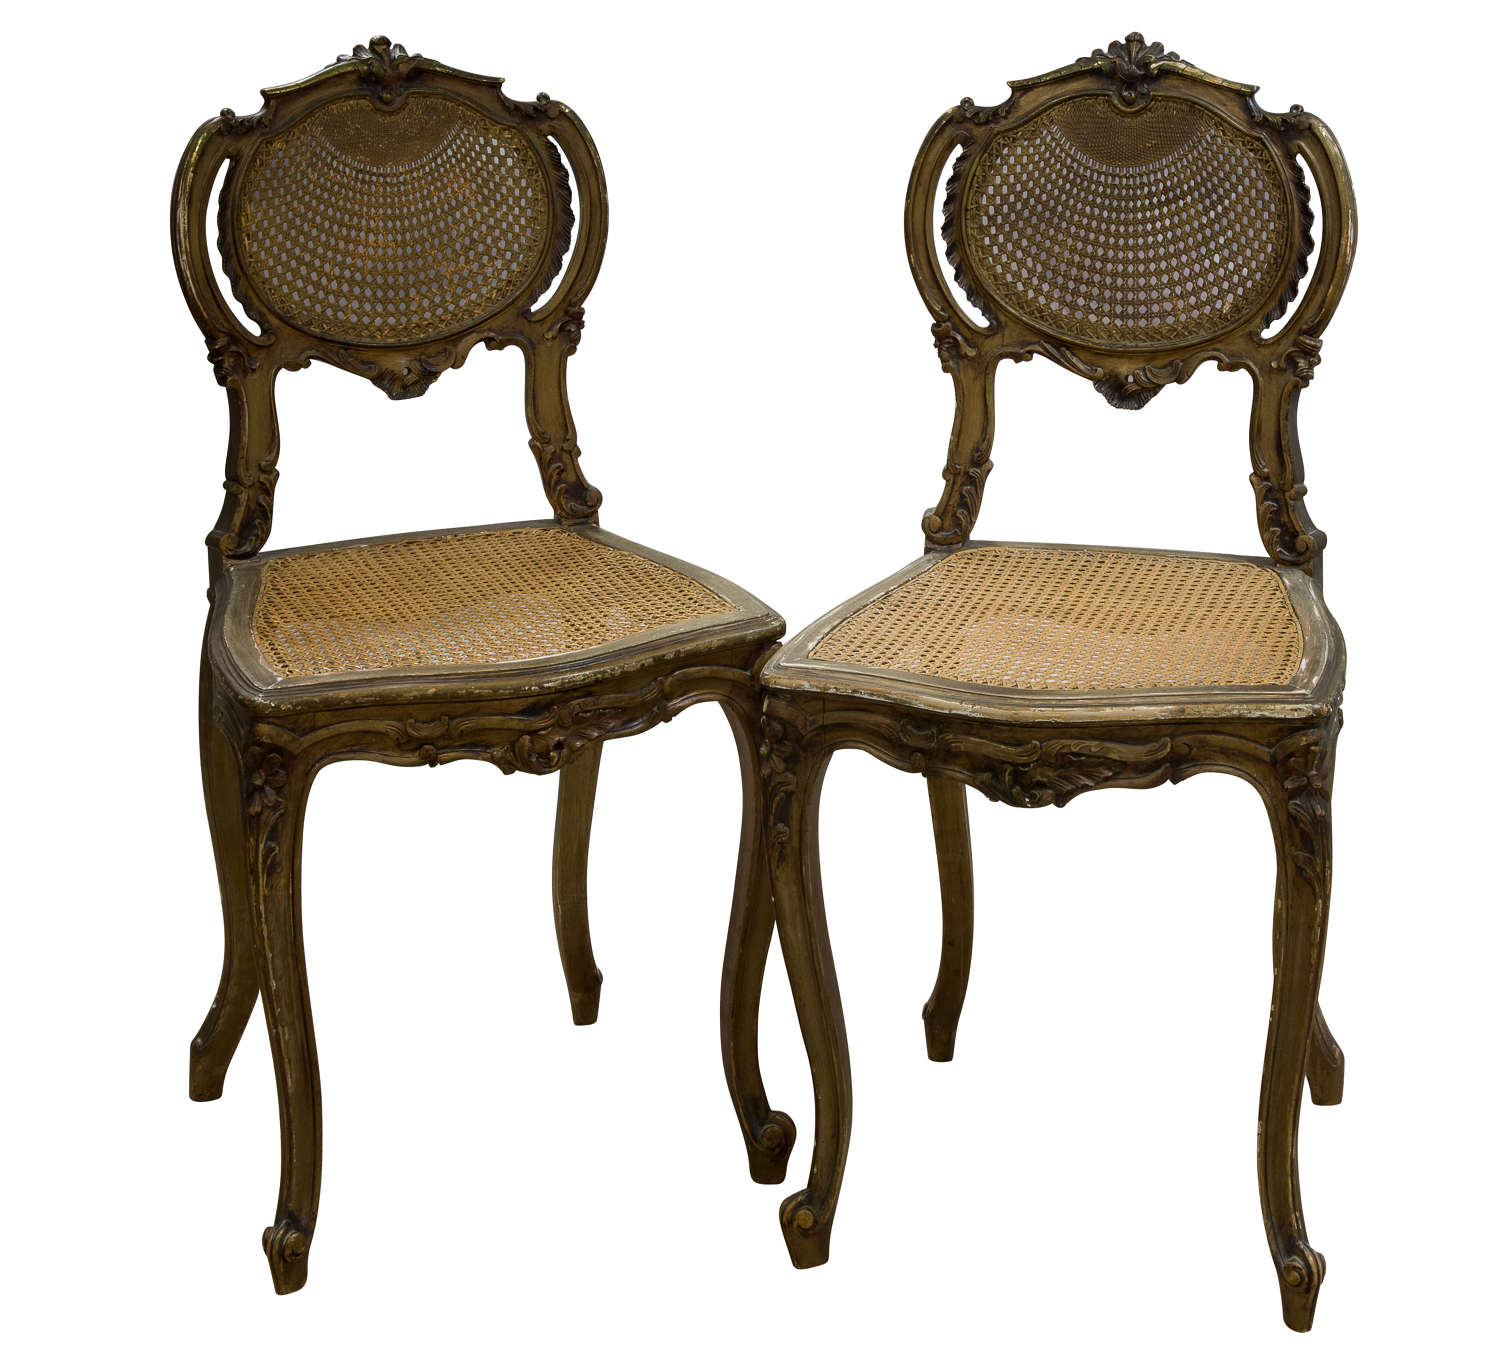 Pair of Antique Carved Giltwood & Cane Rout Chairs